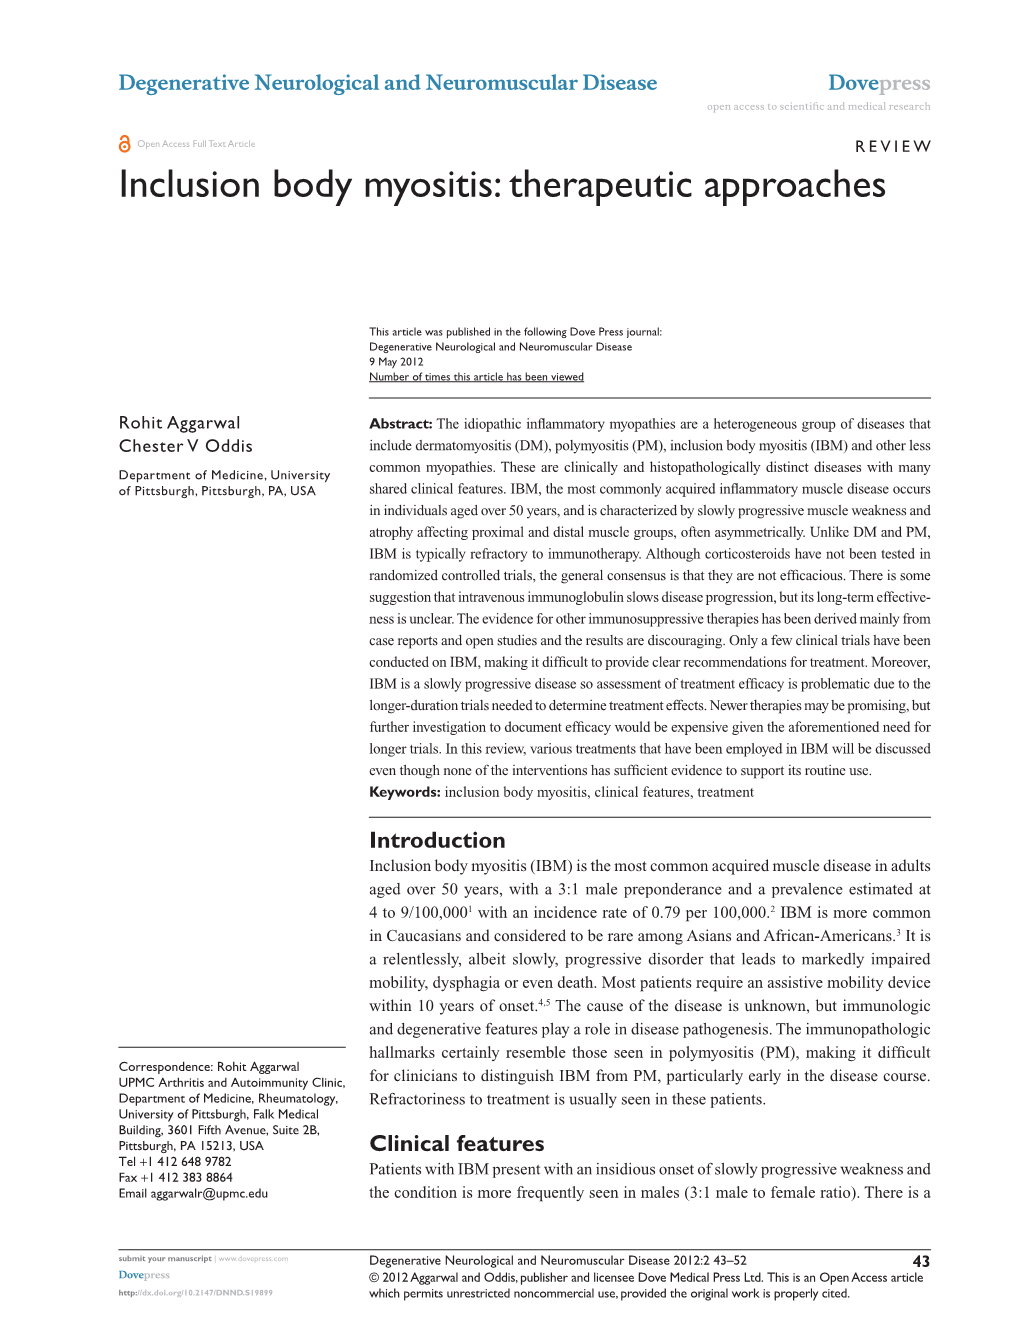 Inclusion Body Myositis: Therapeutic Approaches